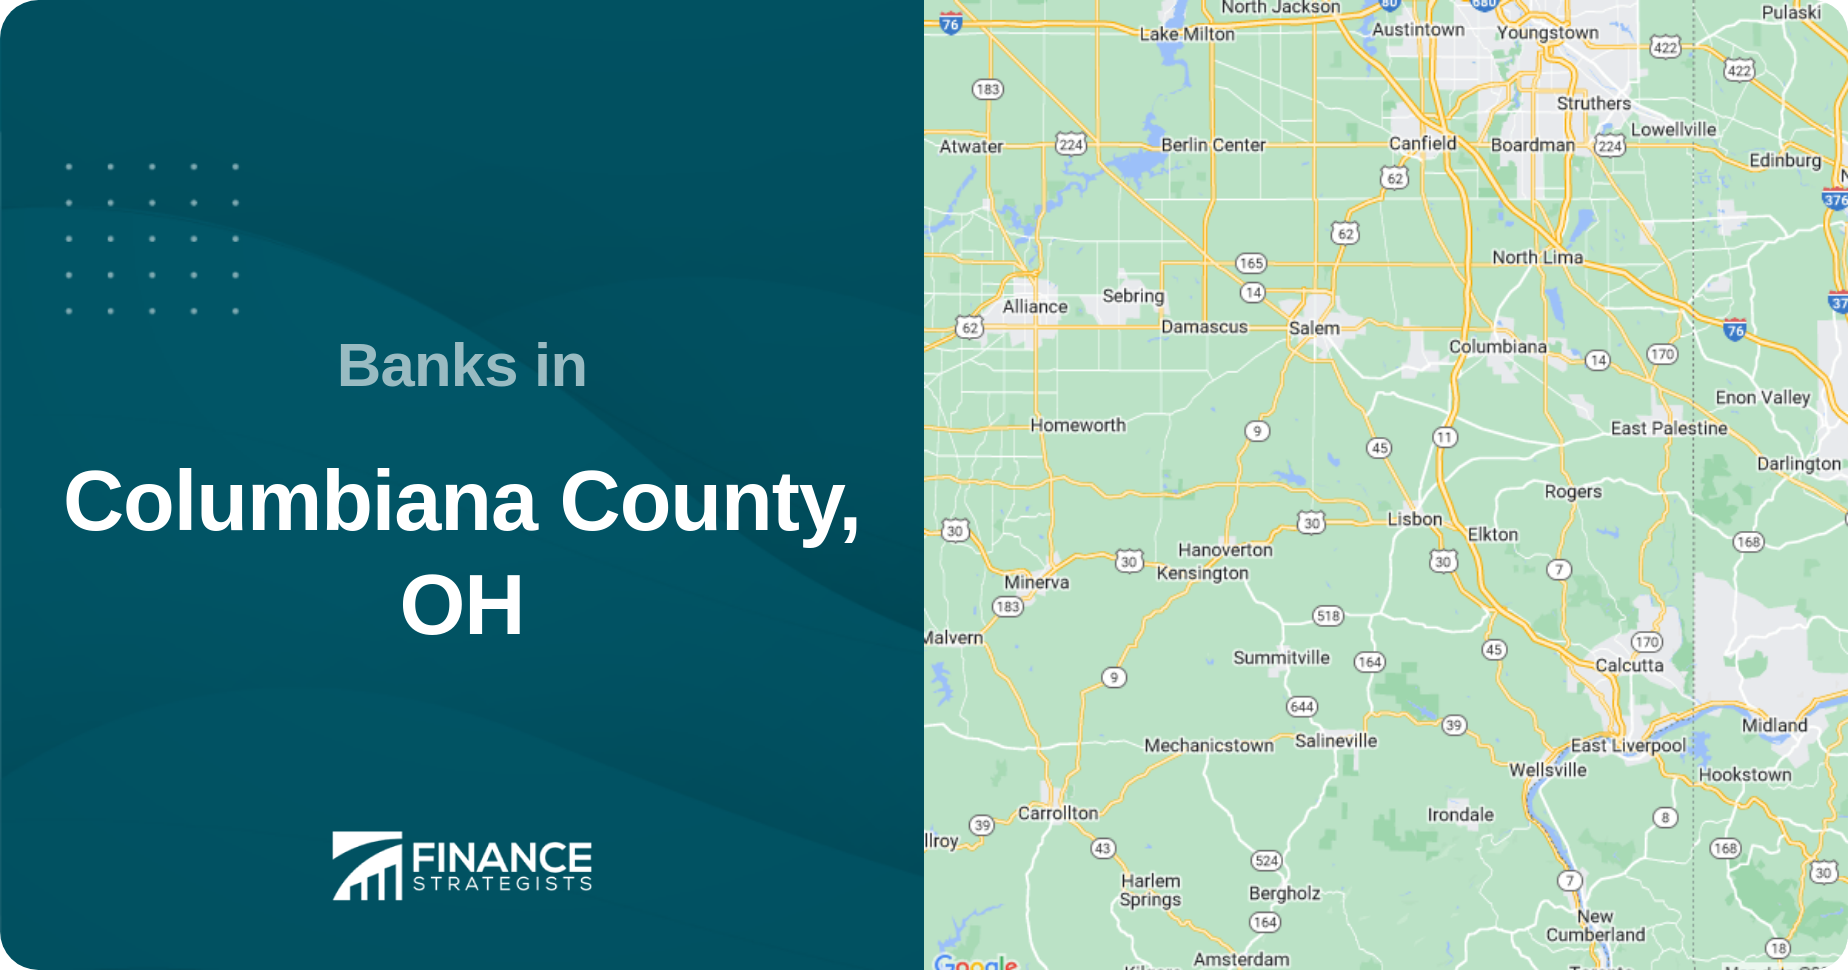 Banks in Columbiana County, OH